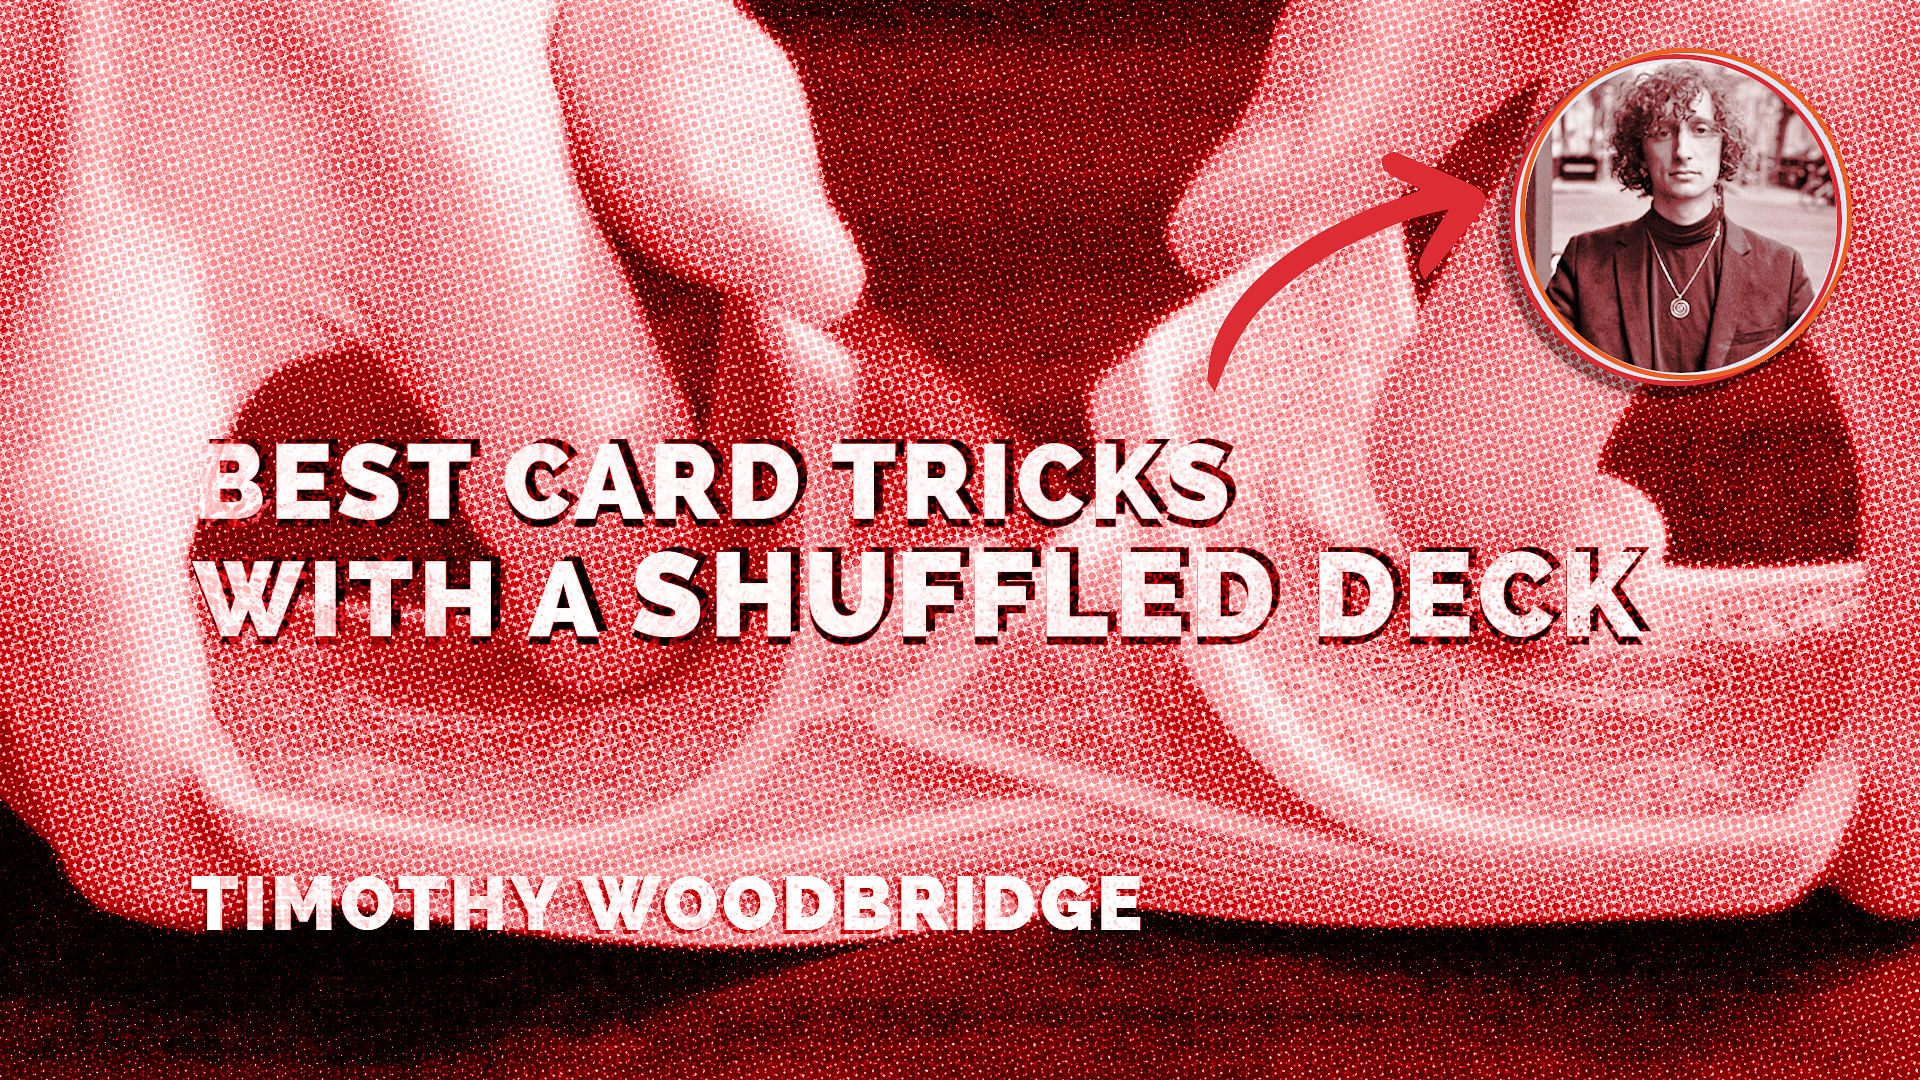 Best card tricks with a shuffled deck in use